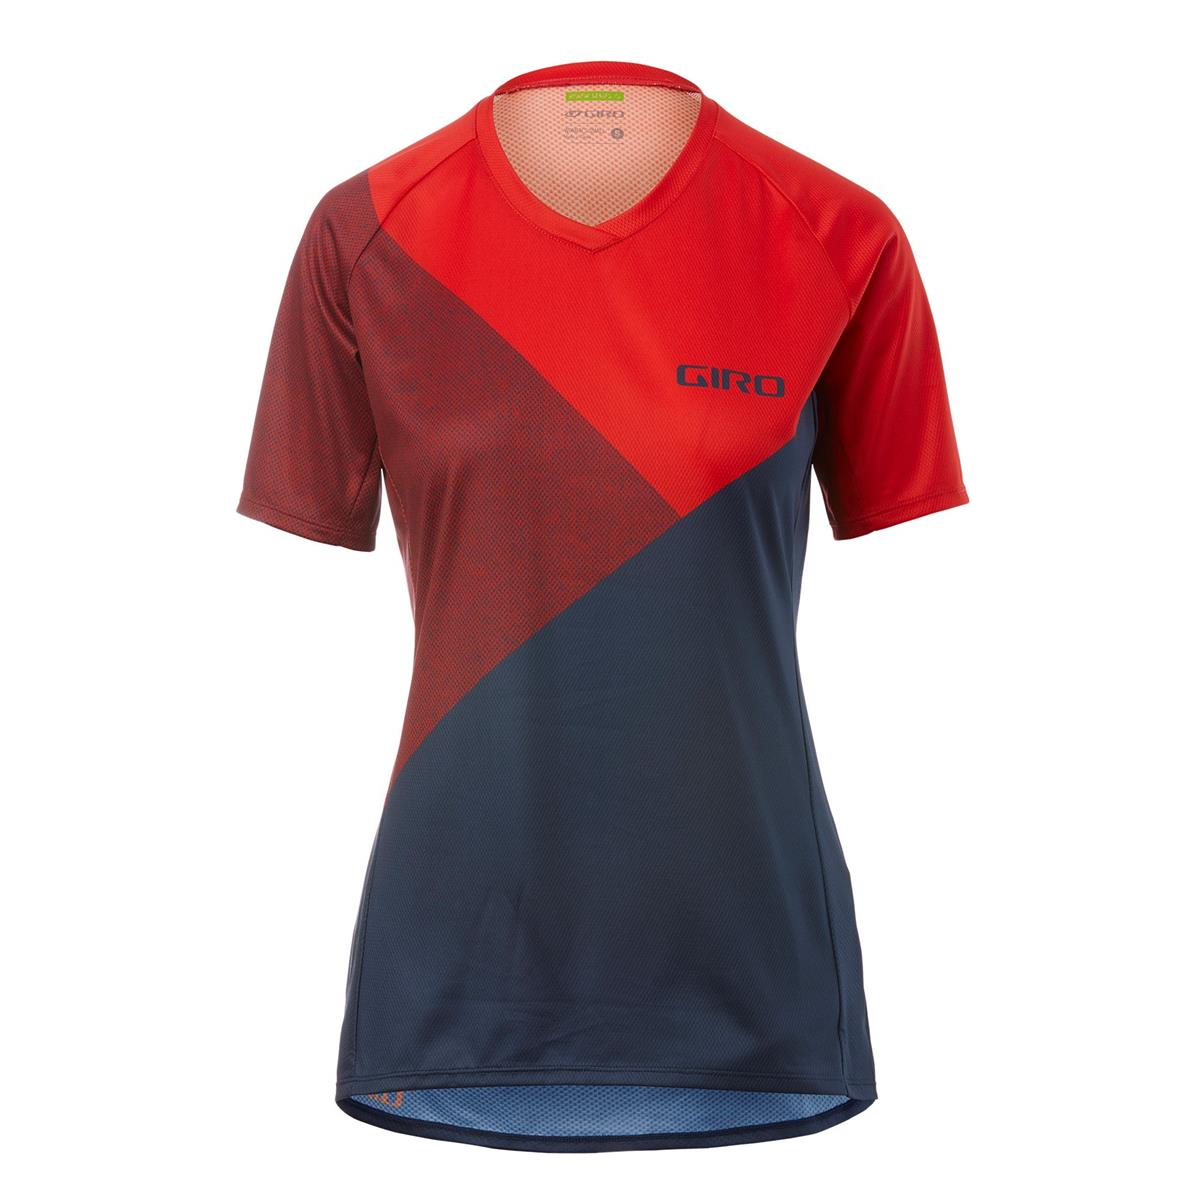 Giro Femme Maillot VTT Manches Courtes Roust Rouge Shadow